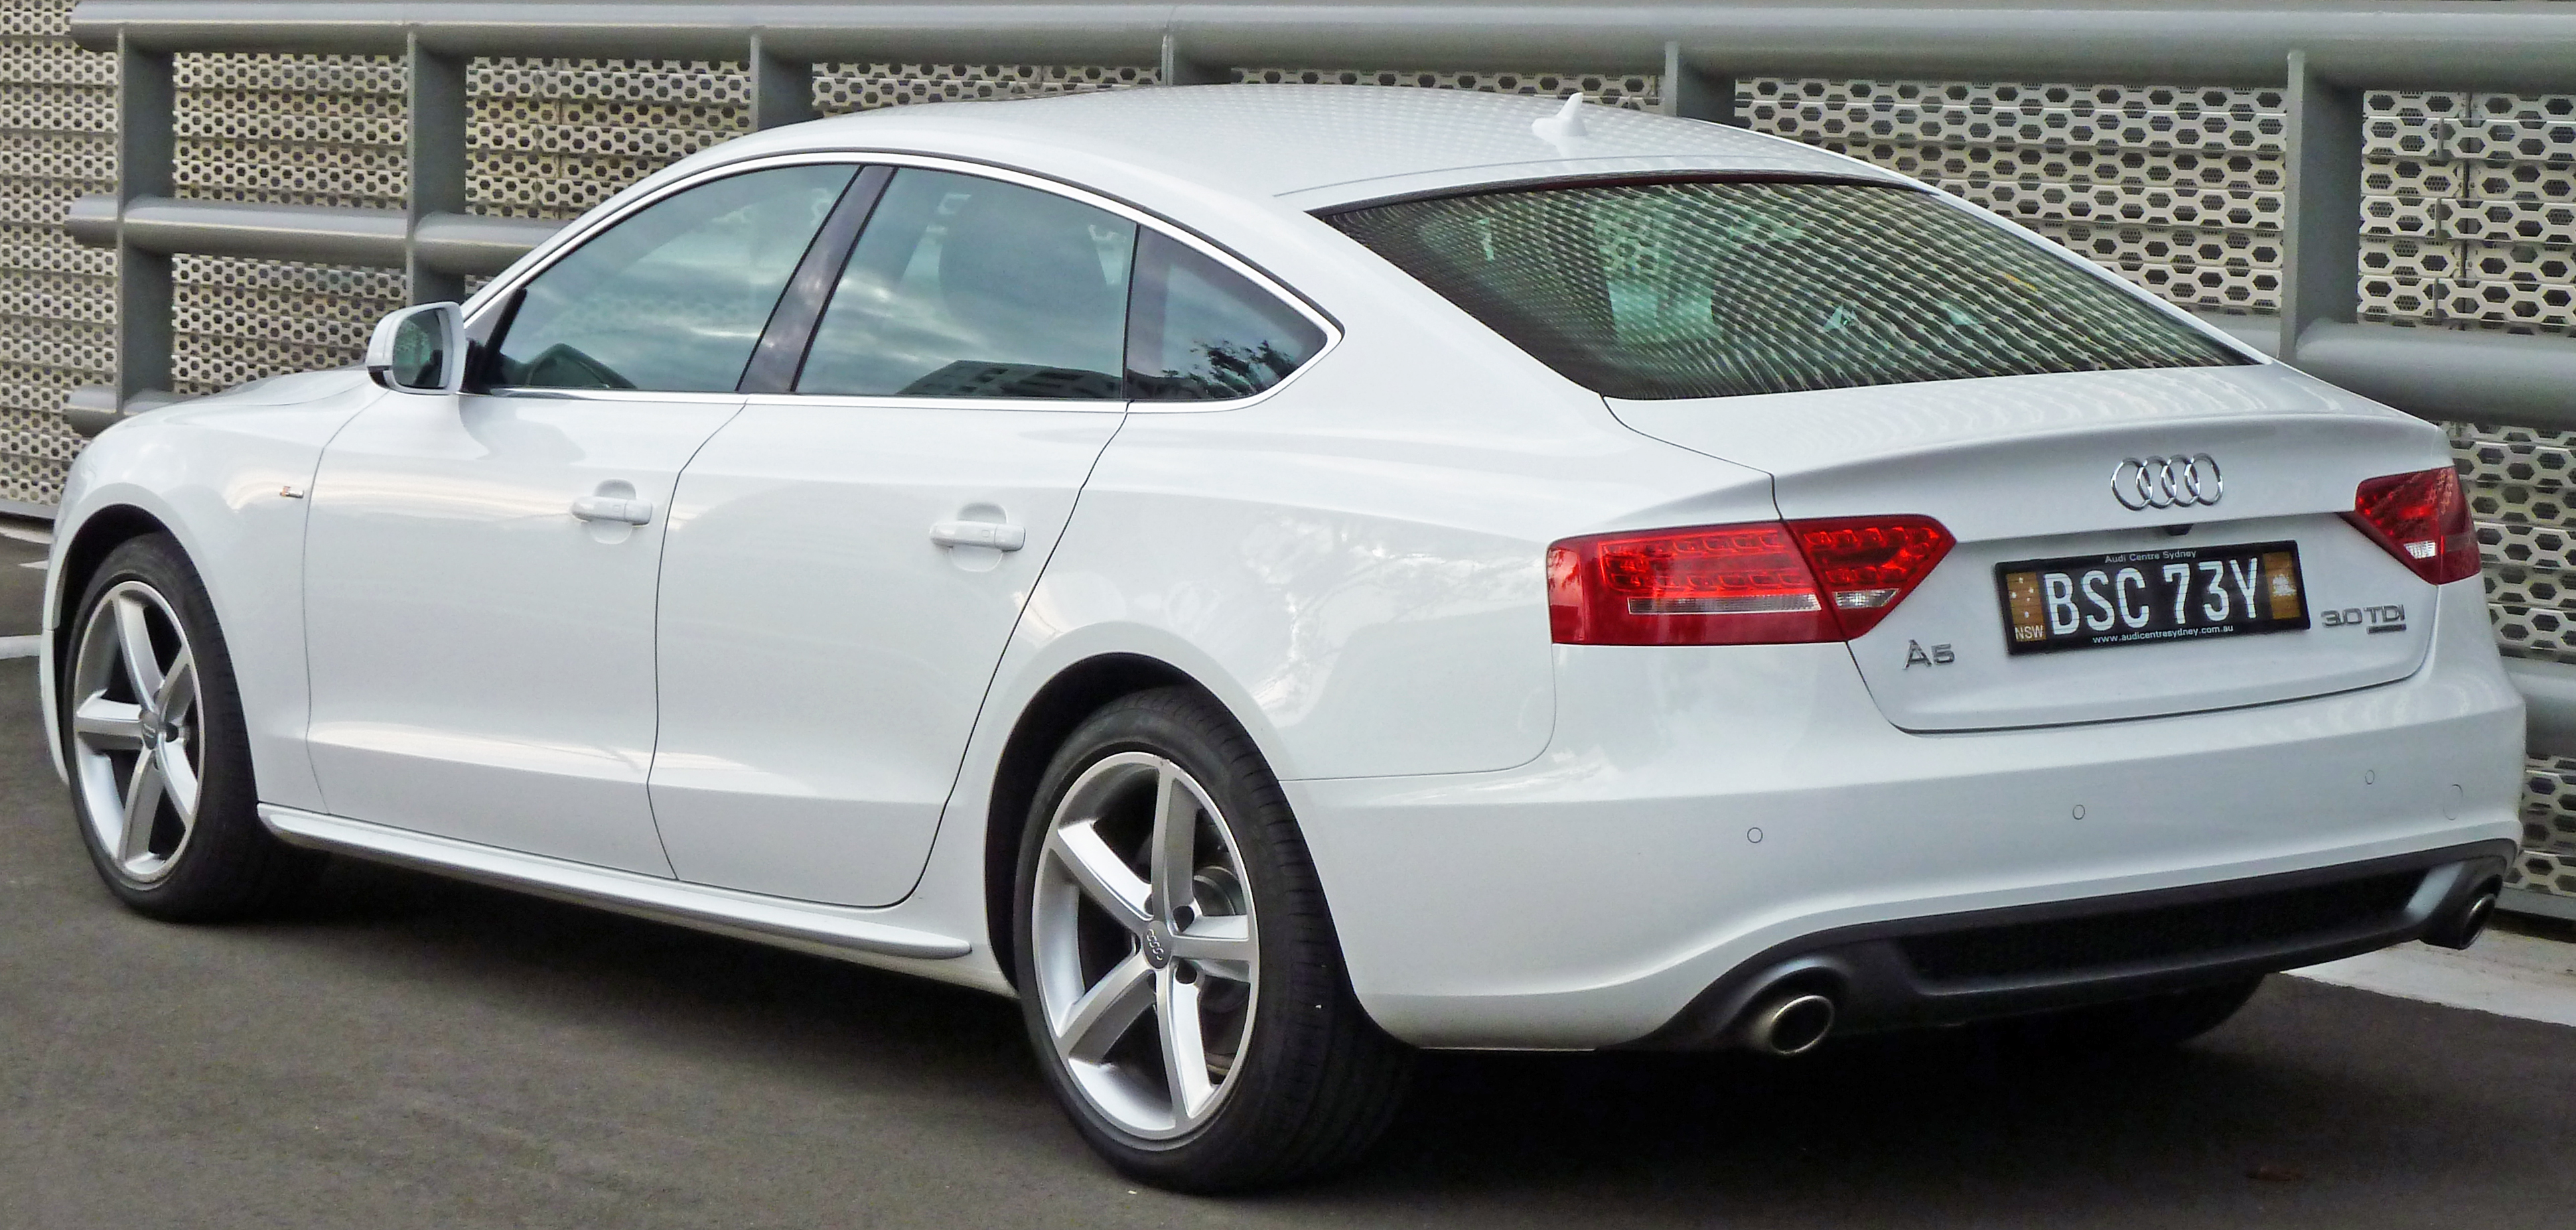 Audi A5 1st Generation Exterior Rear Side View